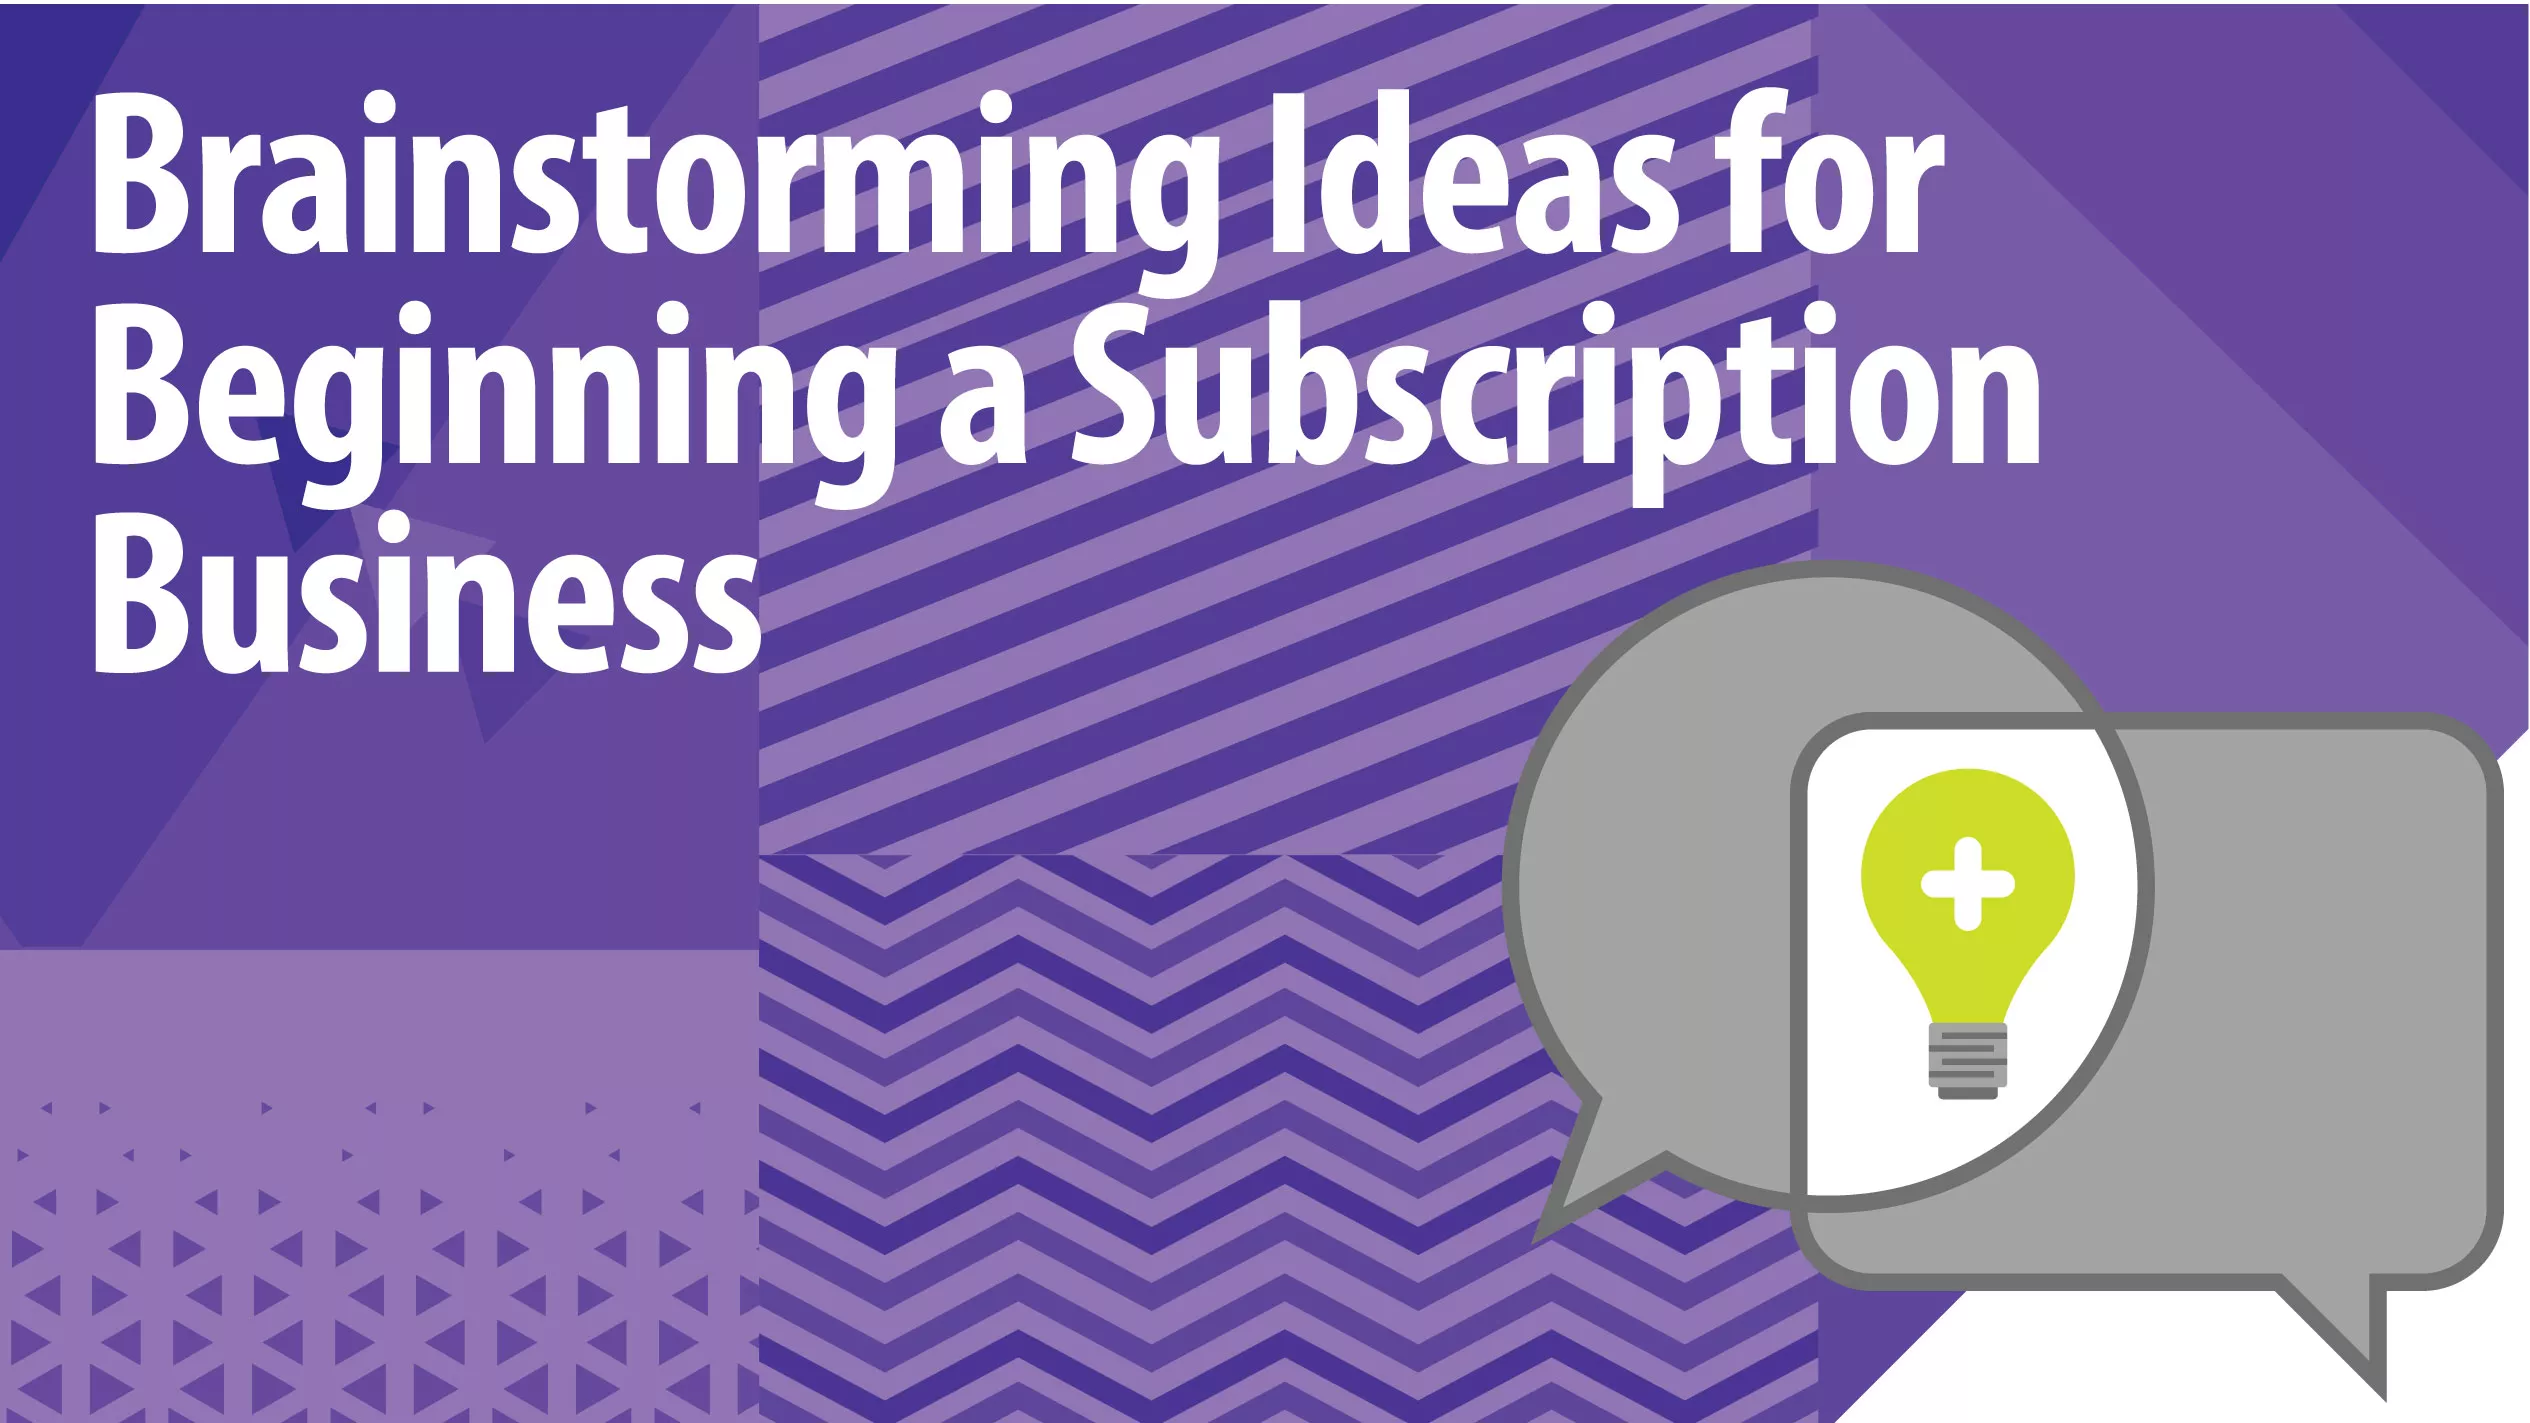 Subscription Brainstorming Business Ideas Article Header